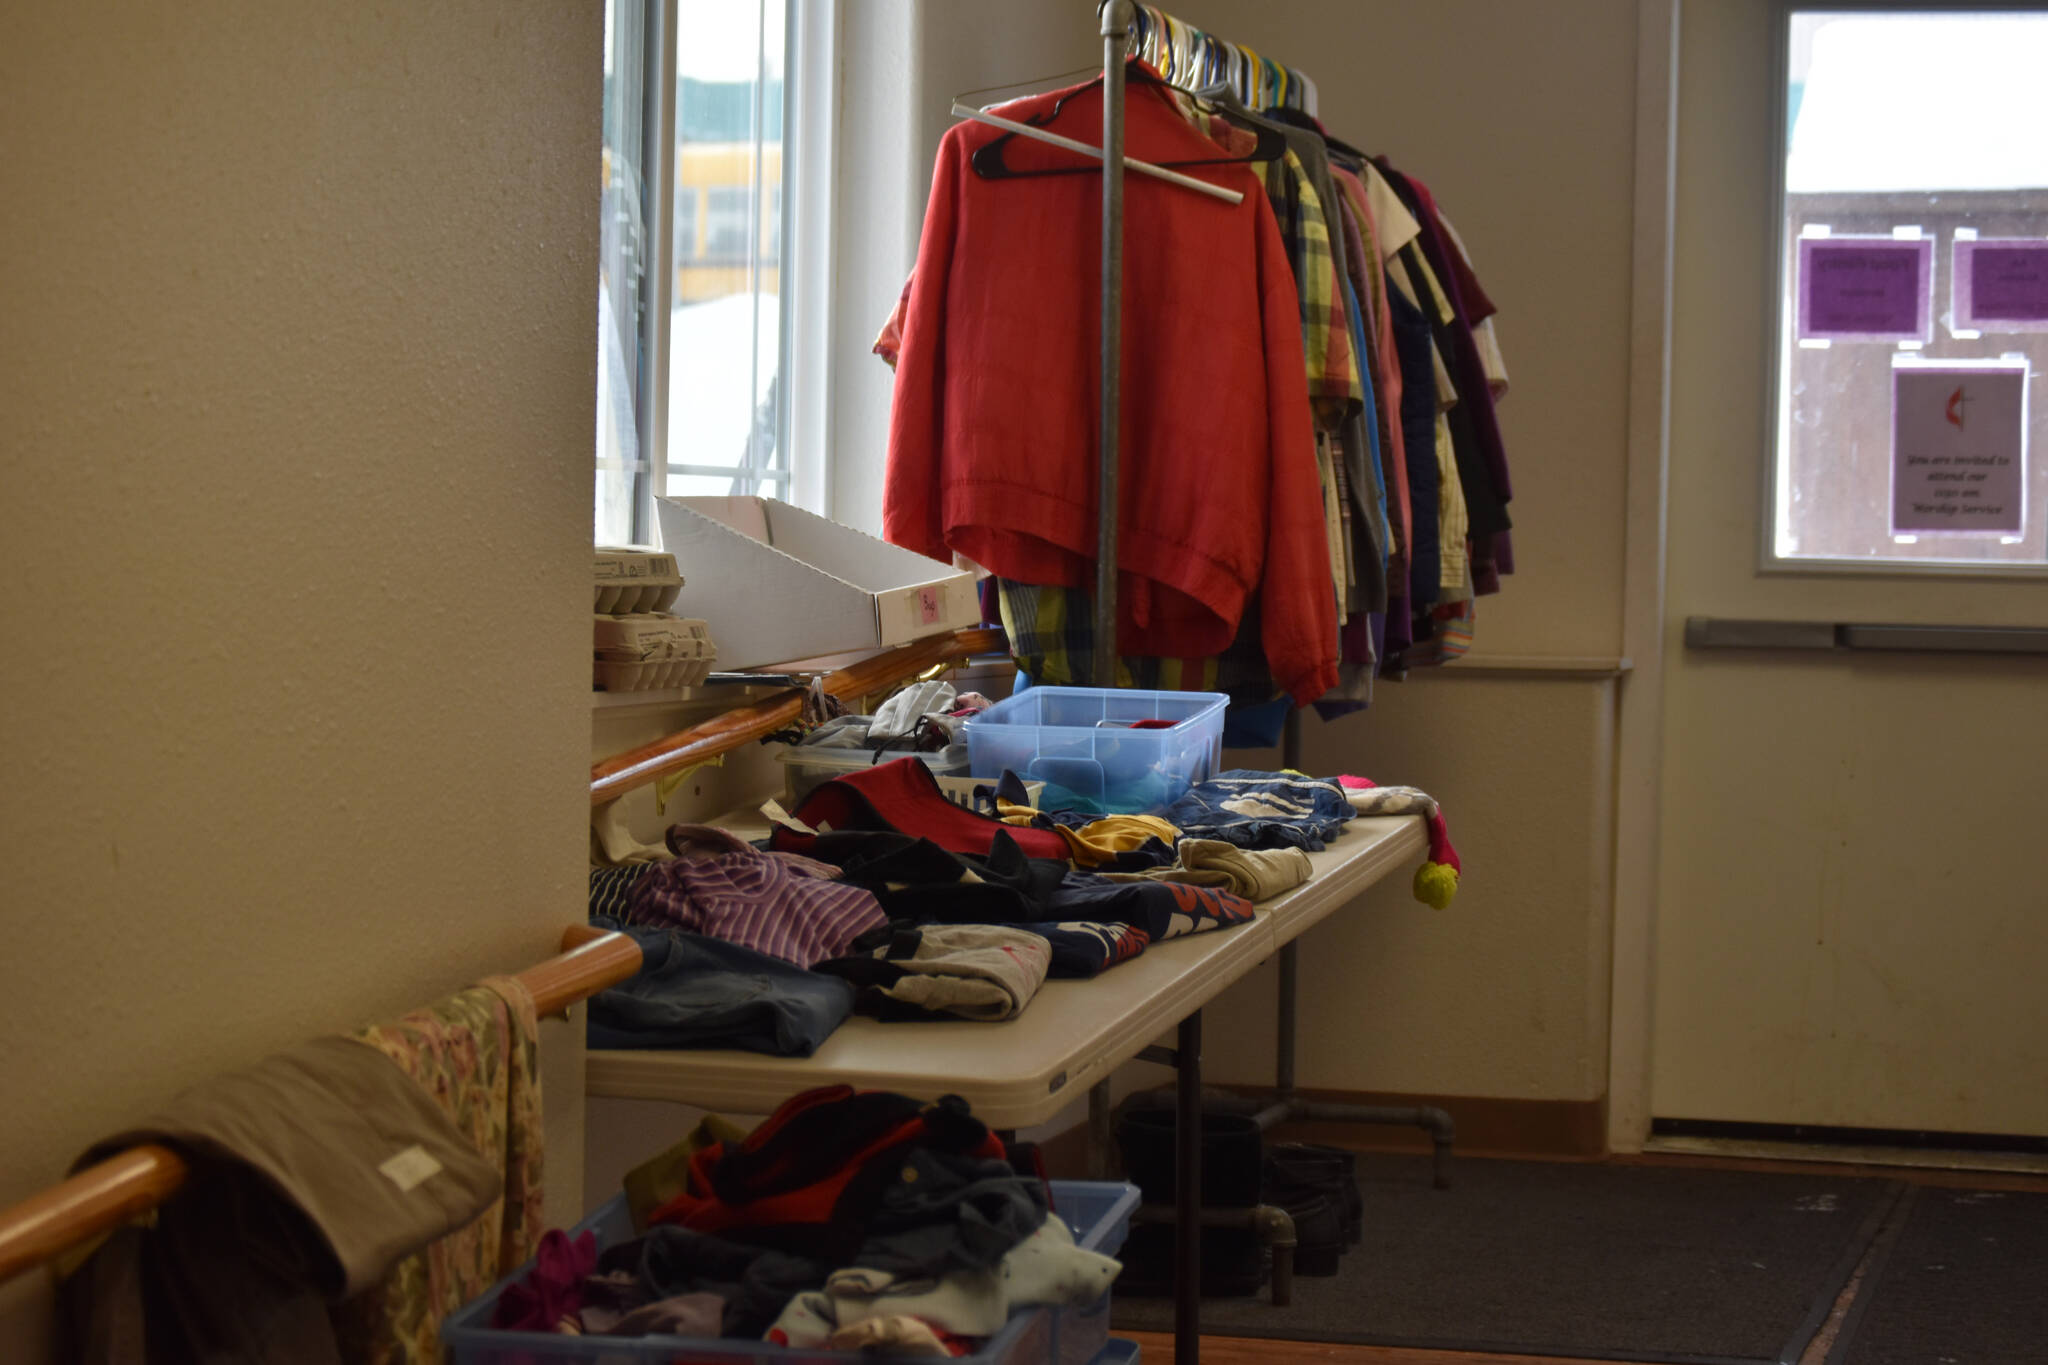 Donated clothes, including sweaters and gloves, are available for those in need at Kenai United Methodist Food Pantry in Kenai, Alaska, on Monday, Jan. 23, 2022. (Jake Dye/Peninsula Clarion)